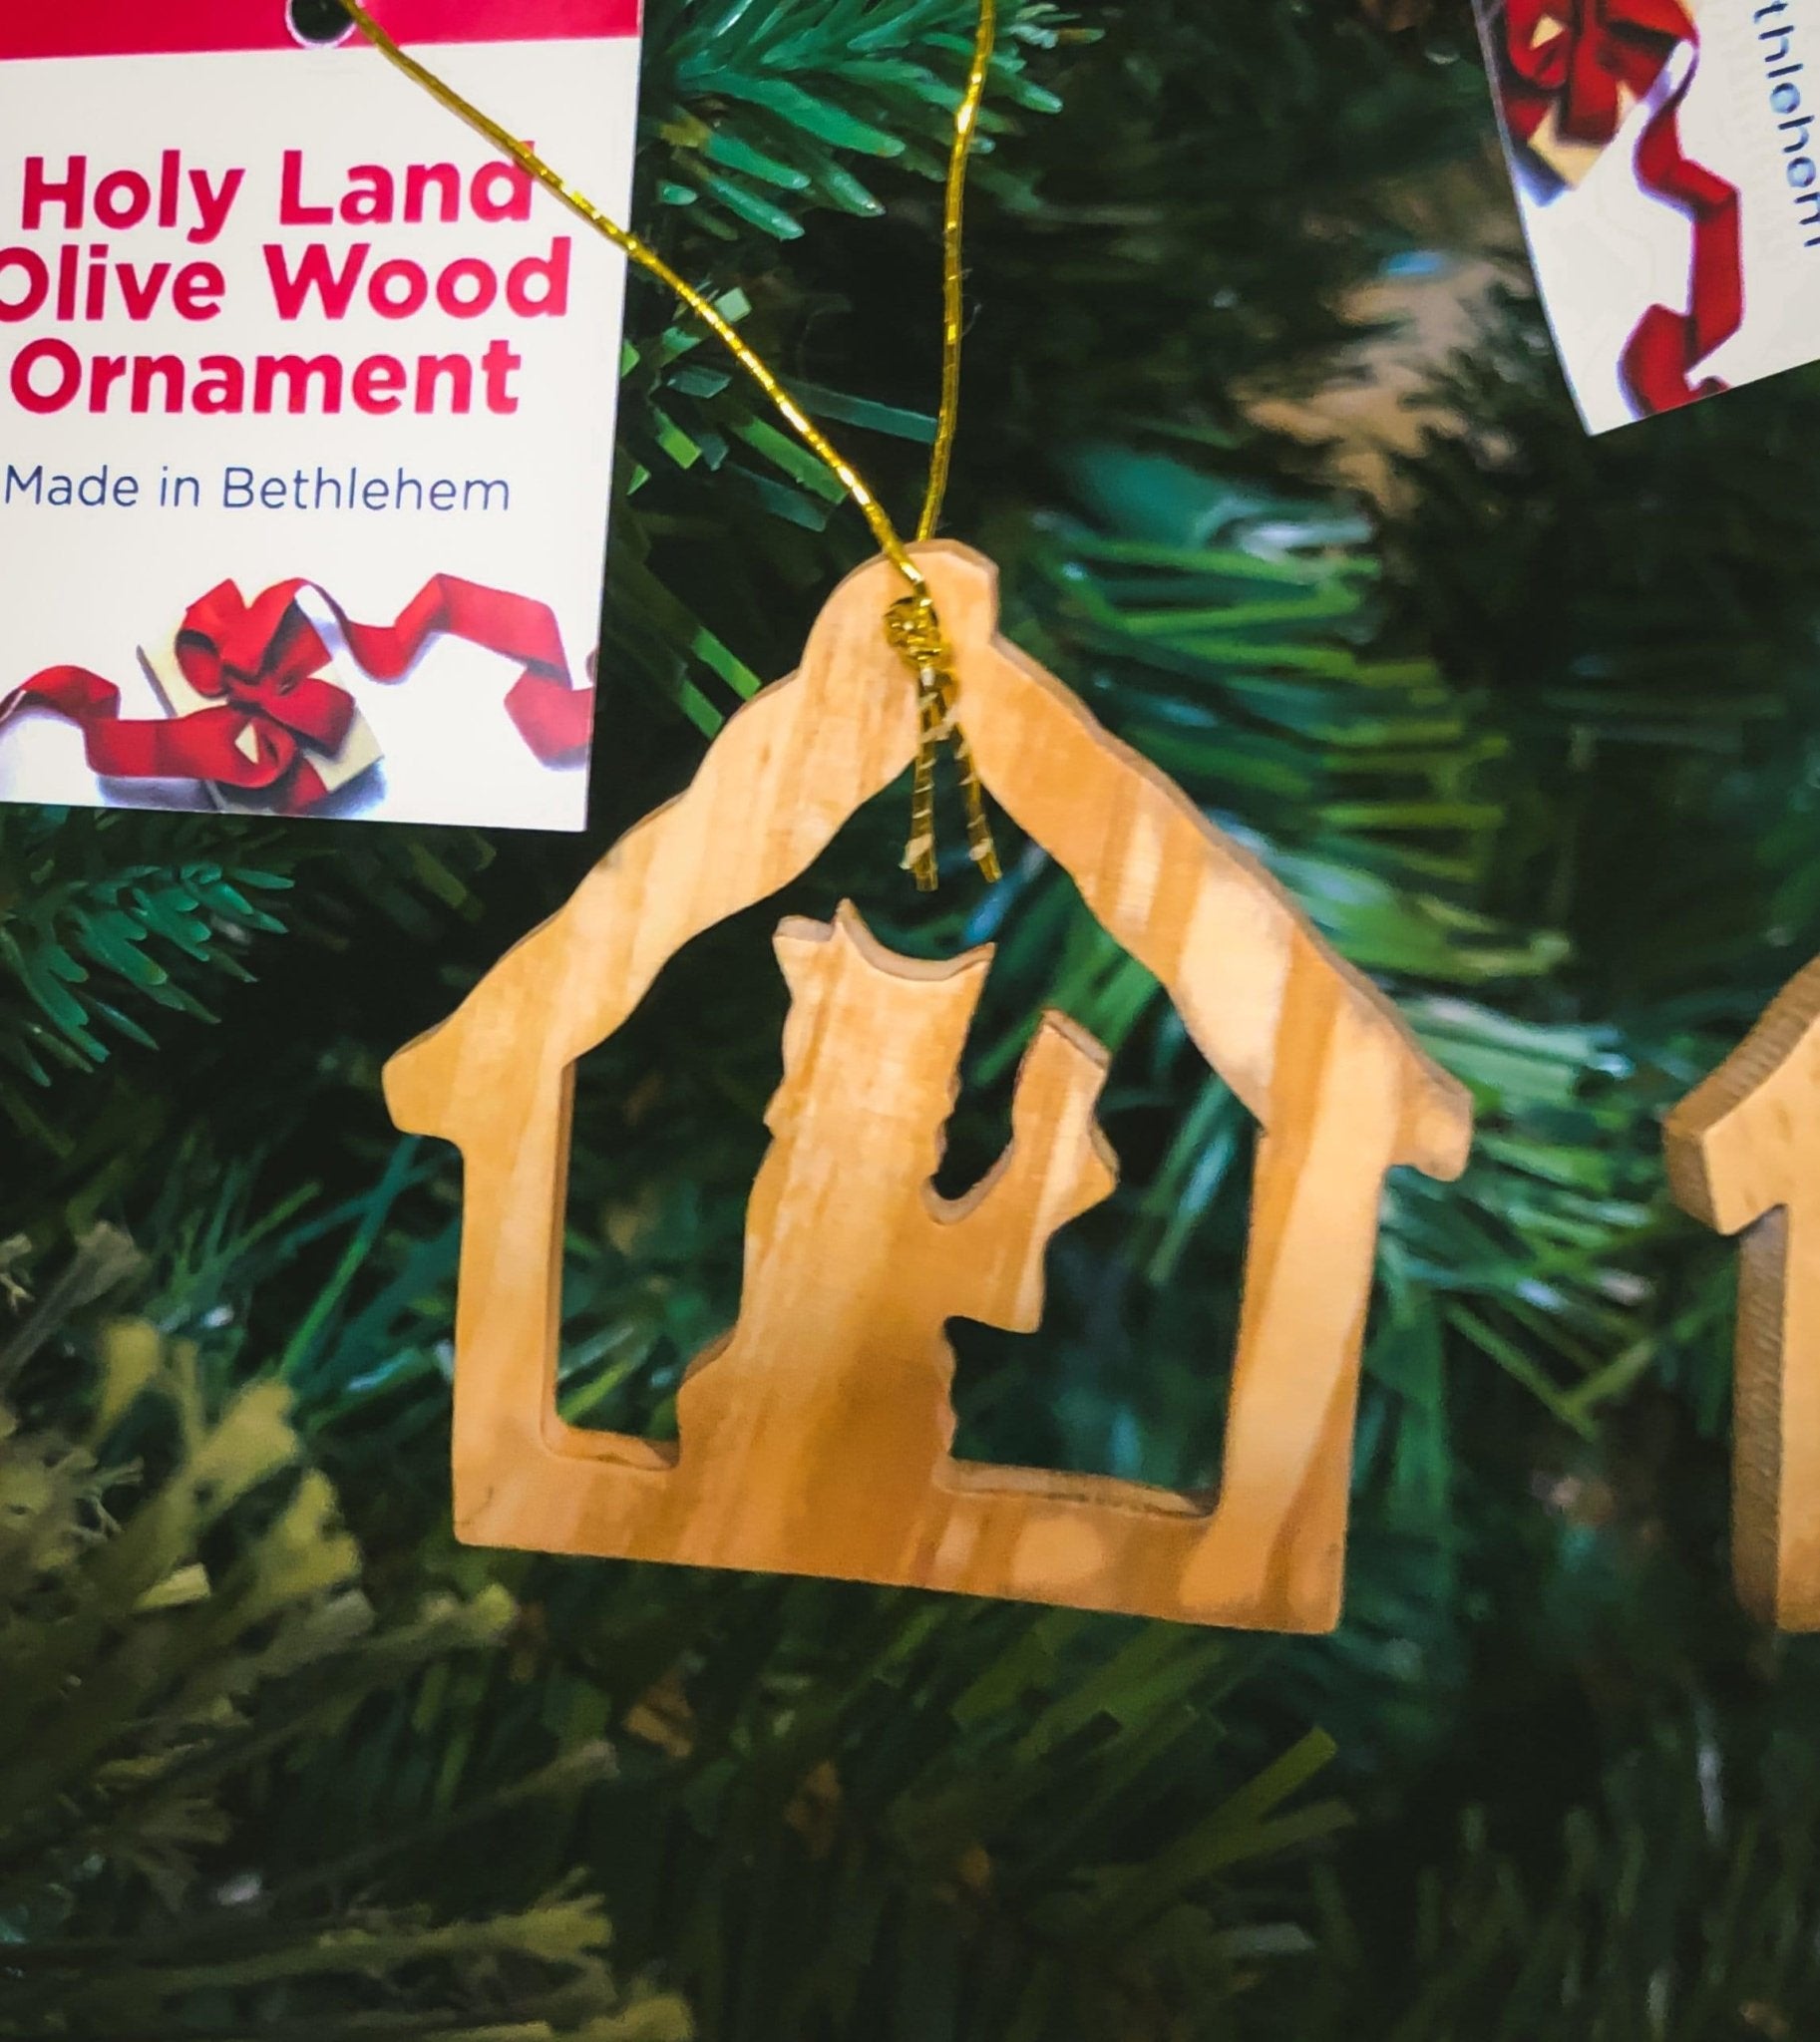 Holy Land Olive Wood Ornament - Value Pack of All 6 - Logos Trading Post, Christian Gift